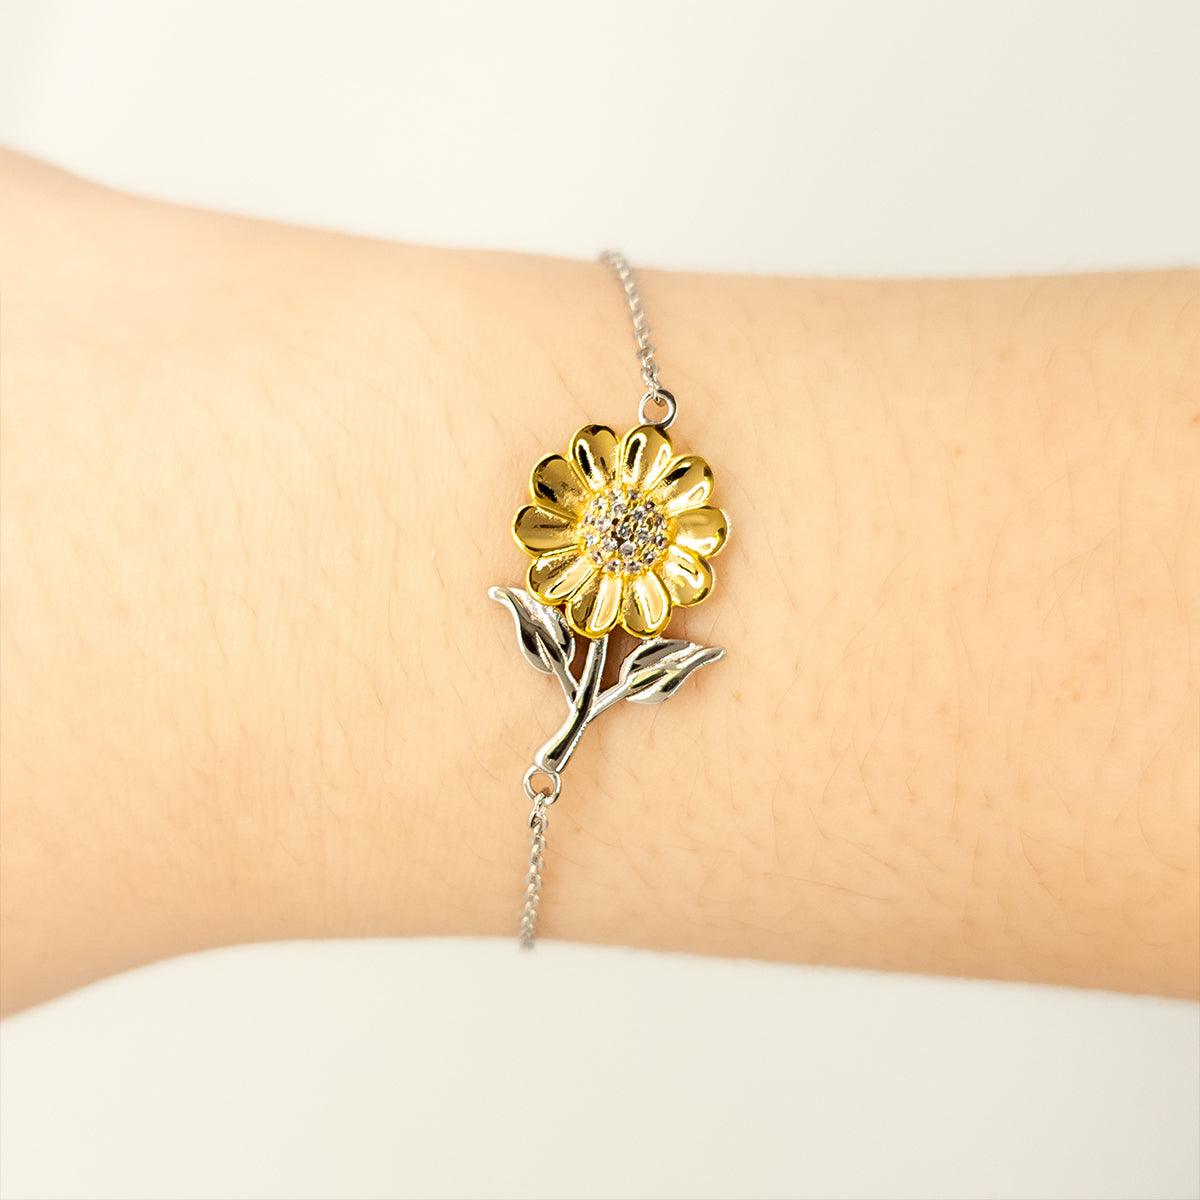 Neurosurgeon Sunflower Bracelet - Thanks for being who you are - Birthday Christmas Jewelry Gifts Coworkers Colleague Boss - Mallard Moon Gift Shop